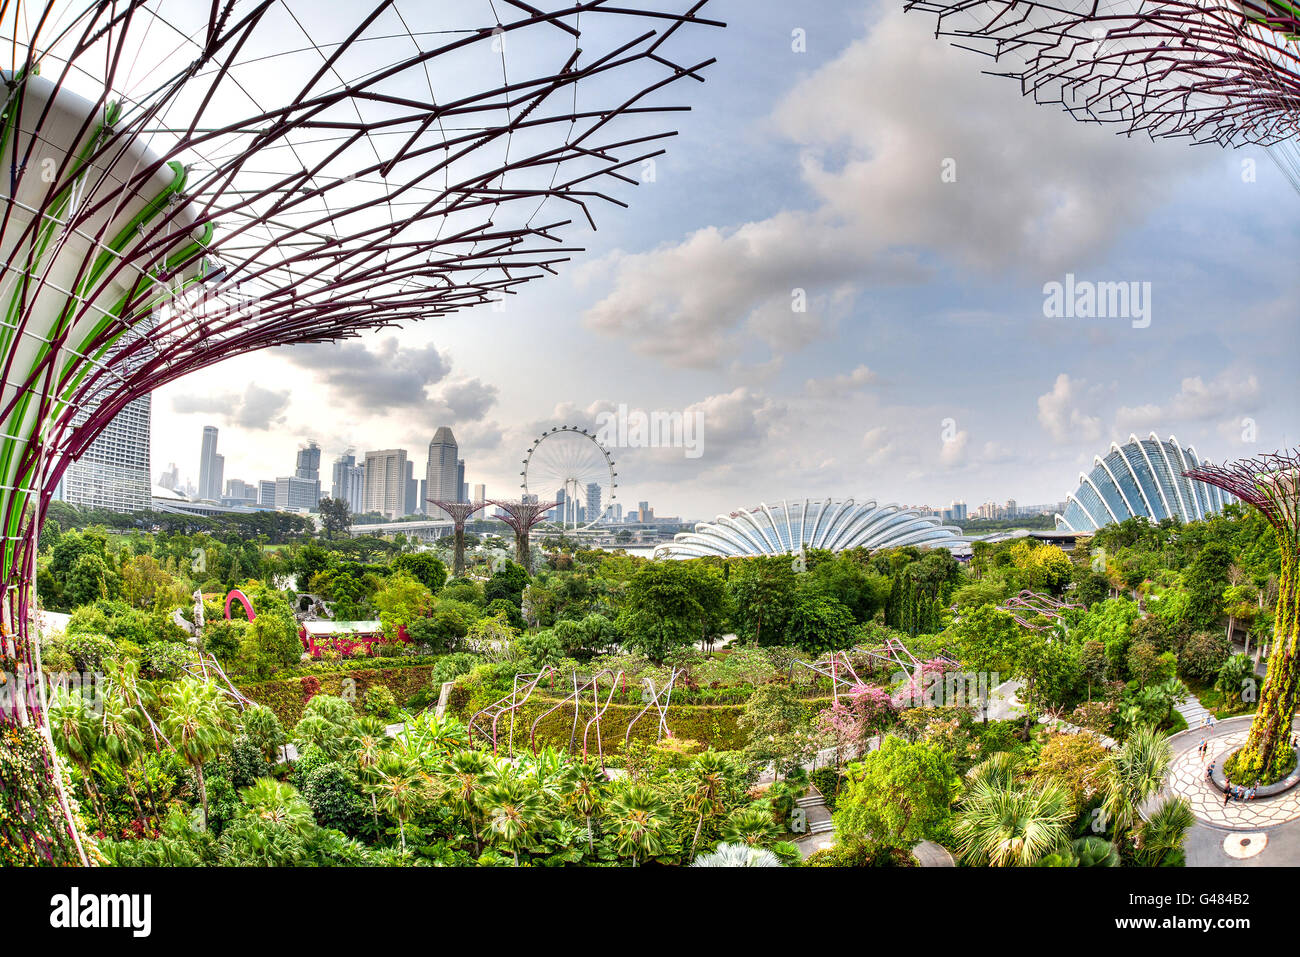 Singapore, Singapore - July 13, 2015: Aerial view of the city skyline from the Supertree Grove Skywalk at Gardens by the Bay. Stock Photo